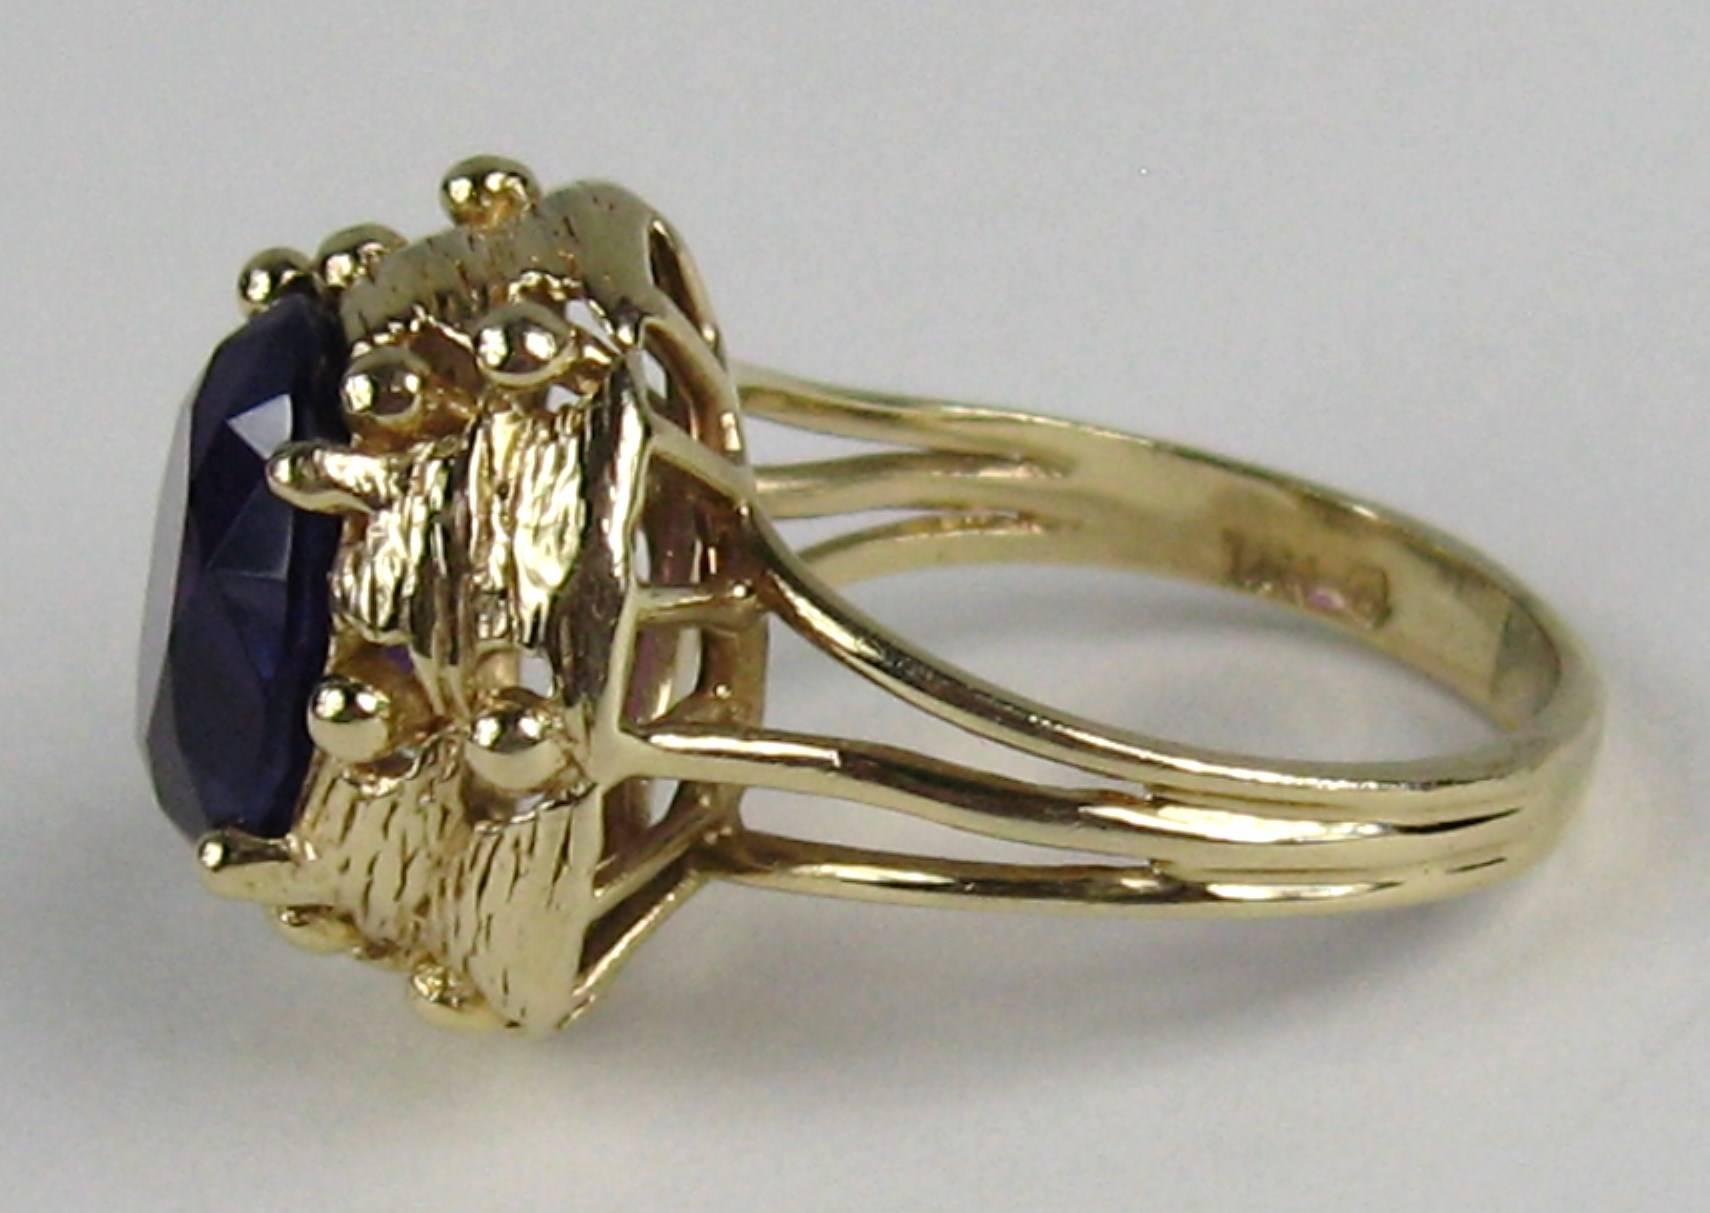 14 Karat Gold Amethyst 3.6 Carat Solitaire Ring In Good Condition For Sale In Wallkill, NY